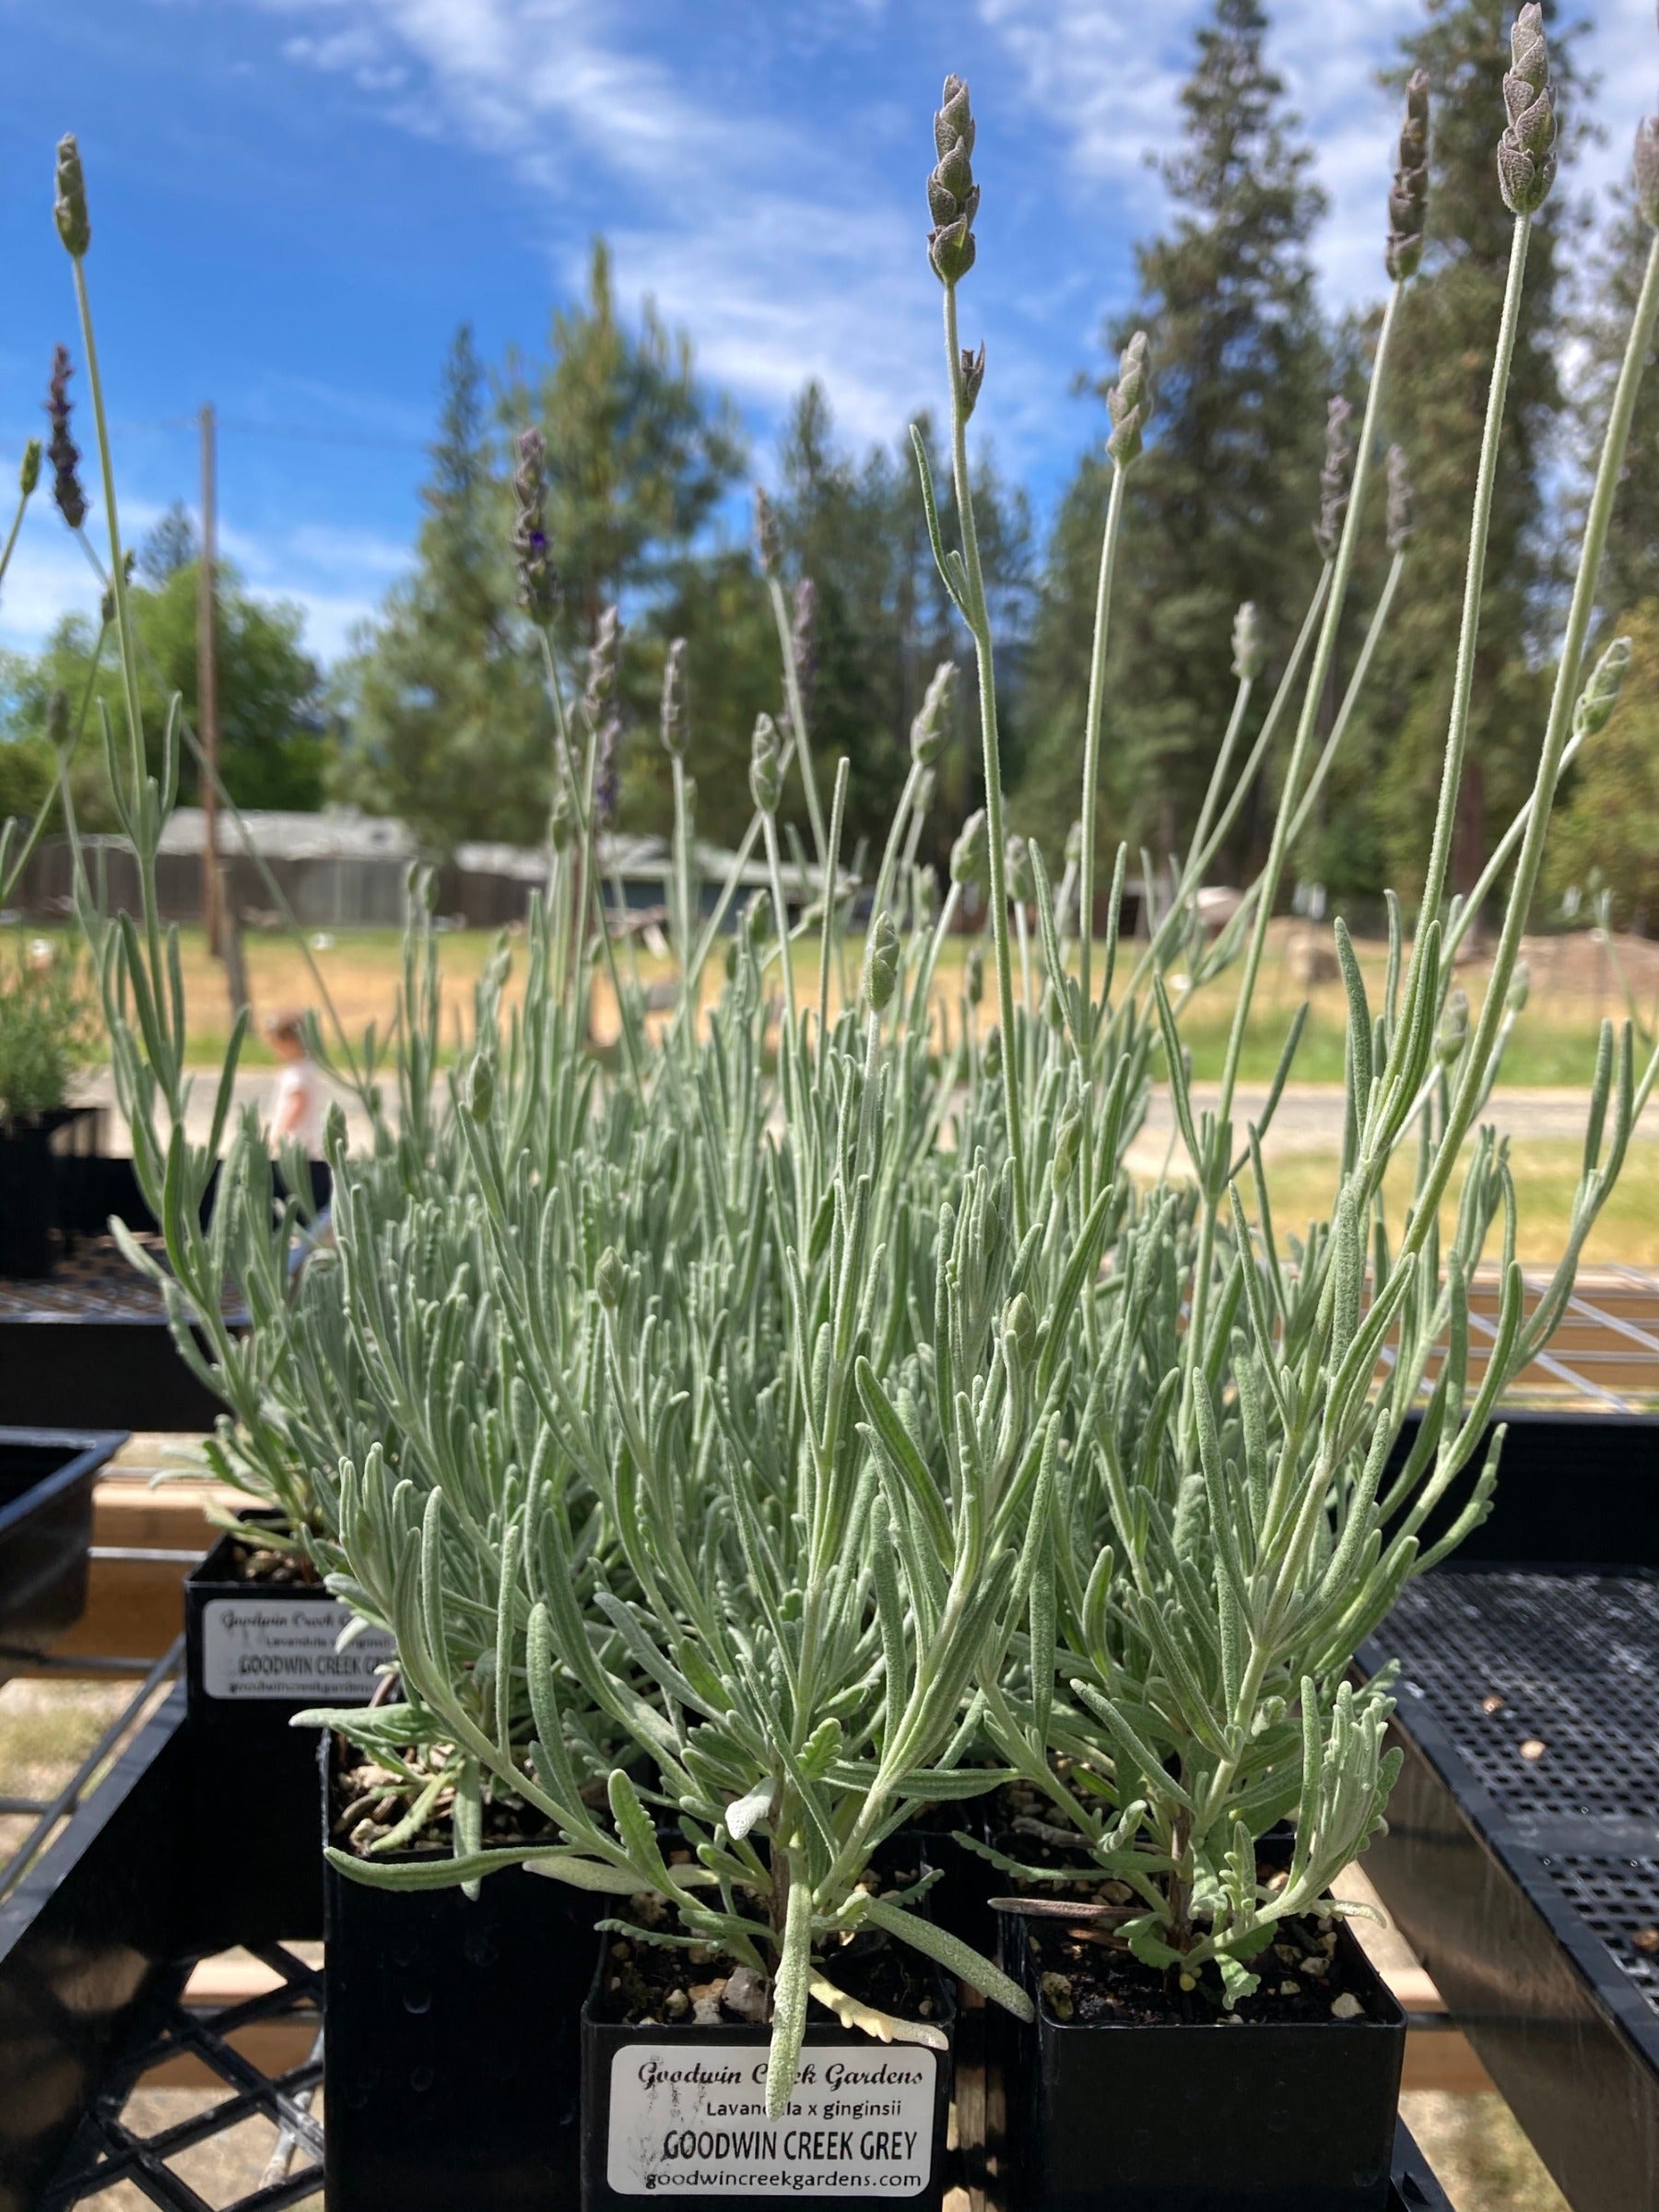 Goodwin Creek Grey potted lavender plant